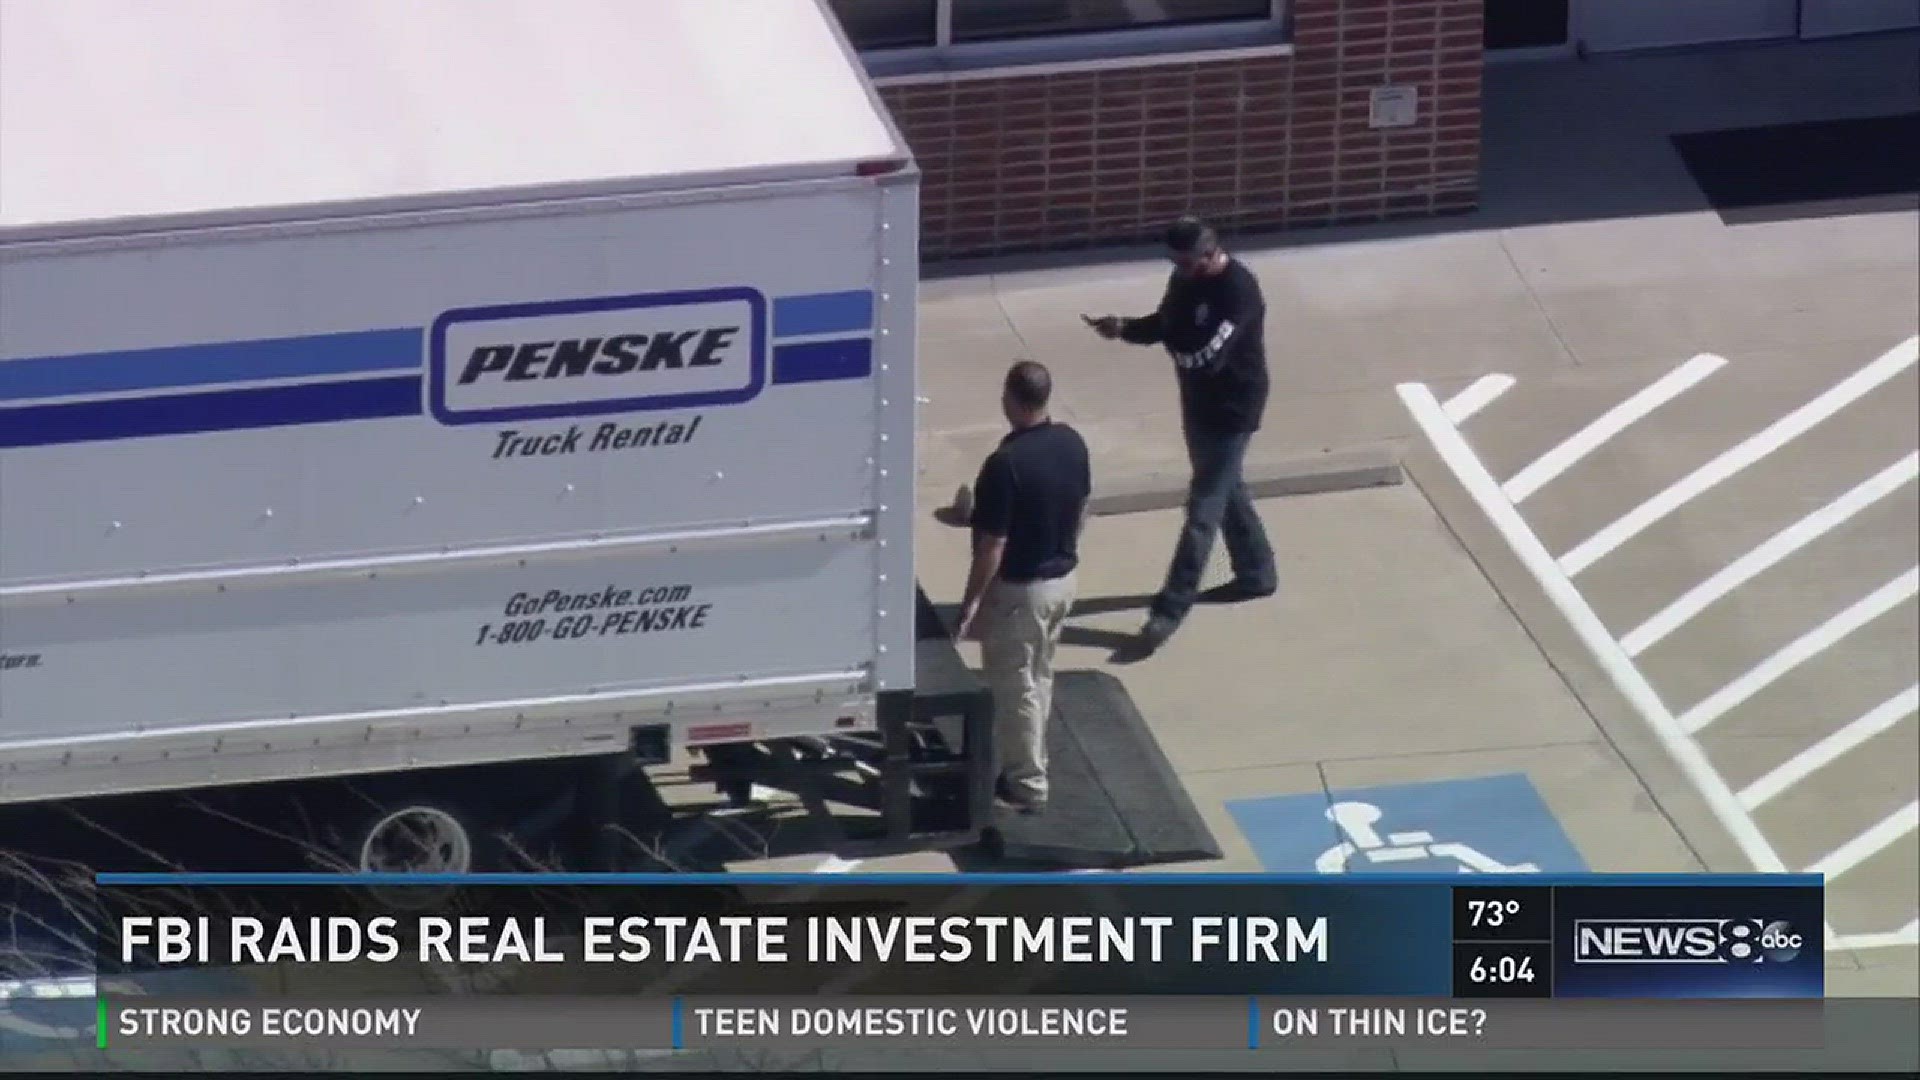 FBI officials raided a real estate investment firm Thursday after accusations of a "ponzi-like scheme," but only said they were performing "law enforcement activities." Philip Townsend reports.